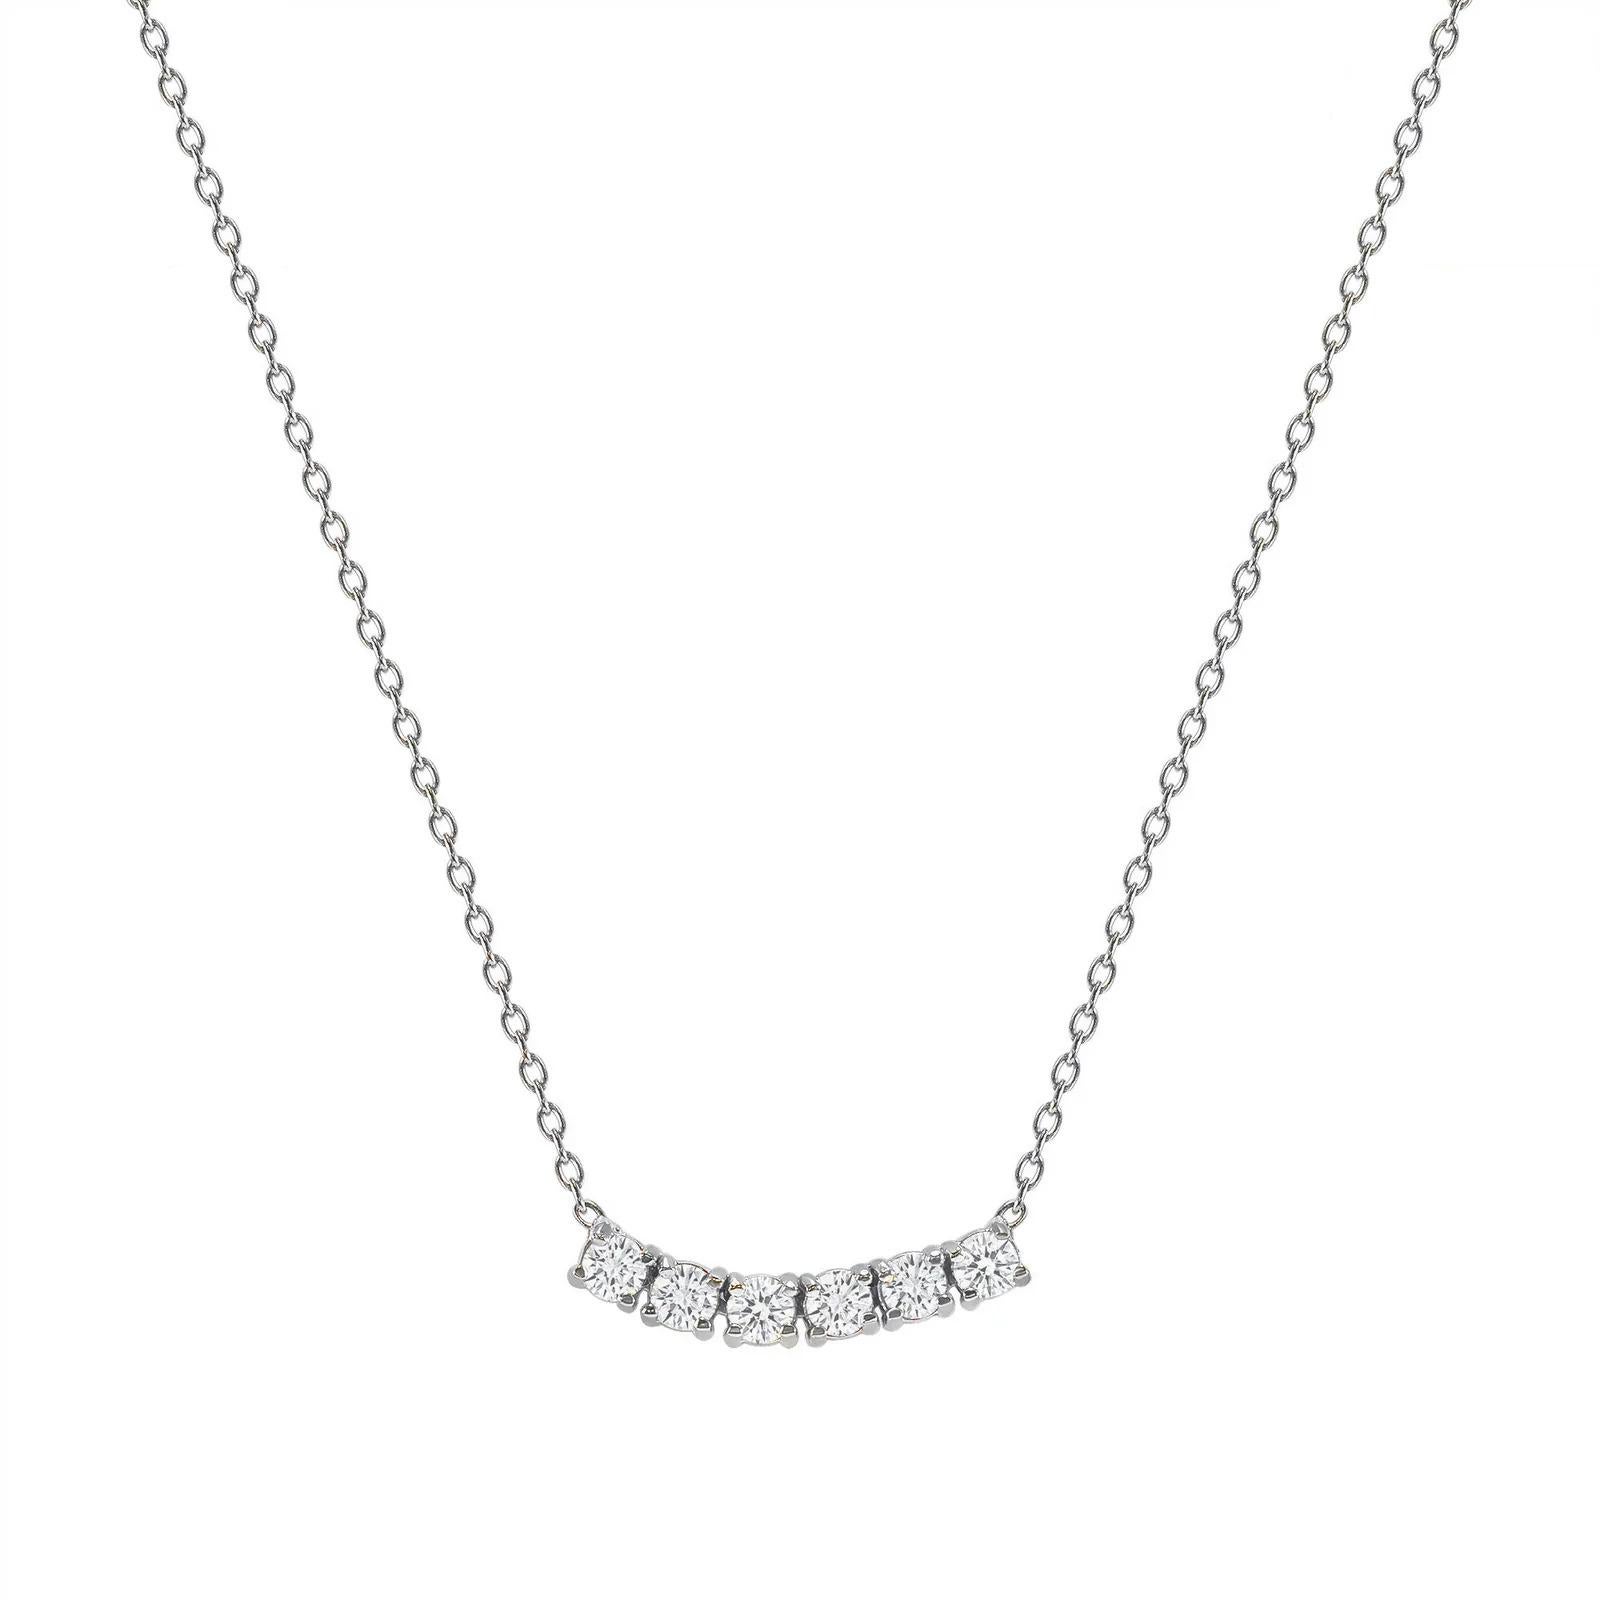 This petite, curved diamond necklace is crafted with gorgeous 14k gold set with six round diamonds.  

Gold: 14k 
Diamond Total Carats: 2 ct
Diamond Cut: Round (6 diamonds)
Diamond Clarity: VS
Diamond Color: F
Color: White Gold
Necklace Length: 16